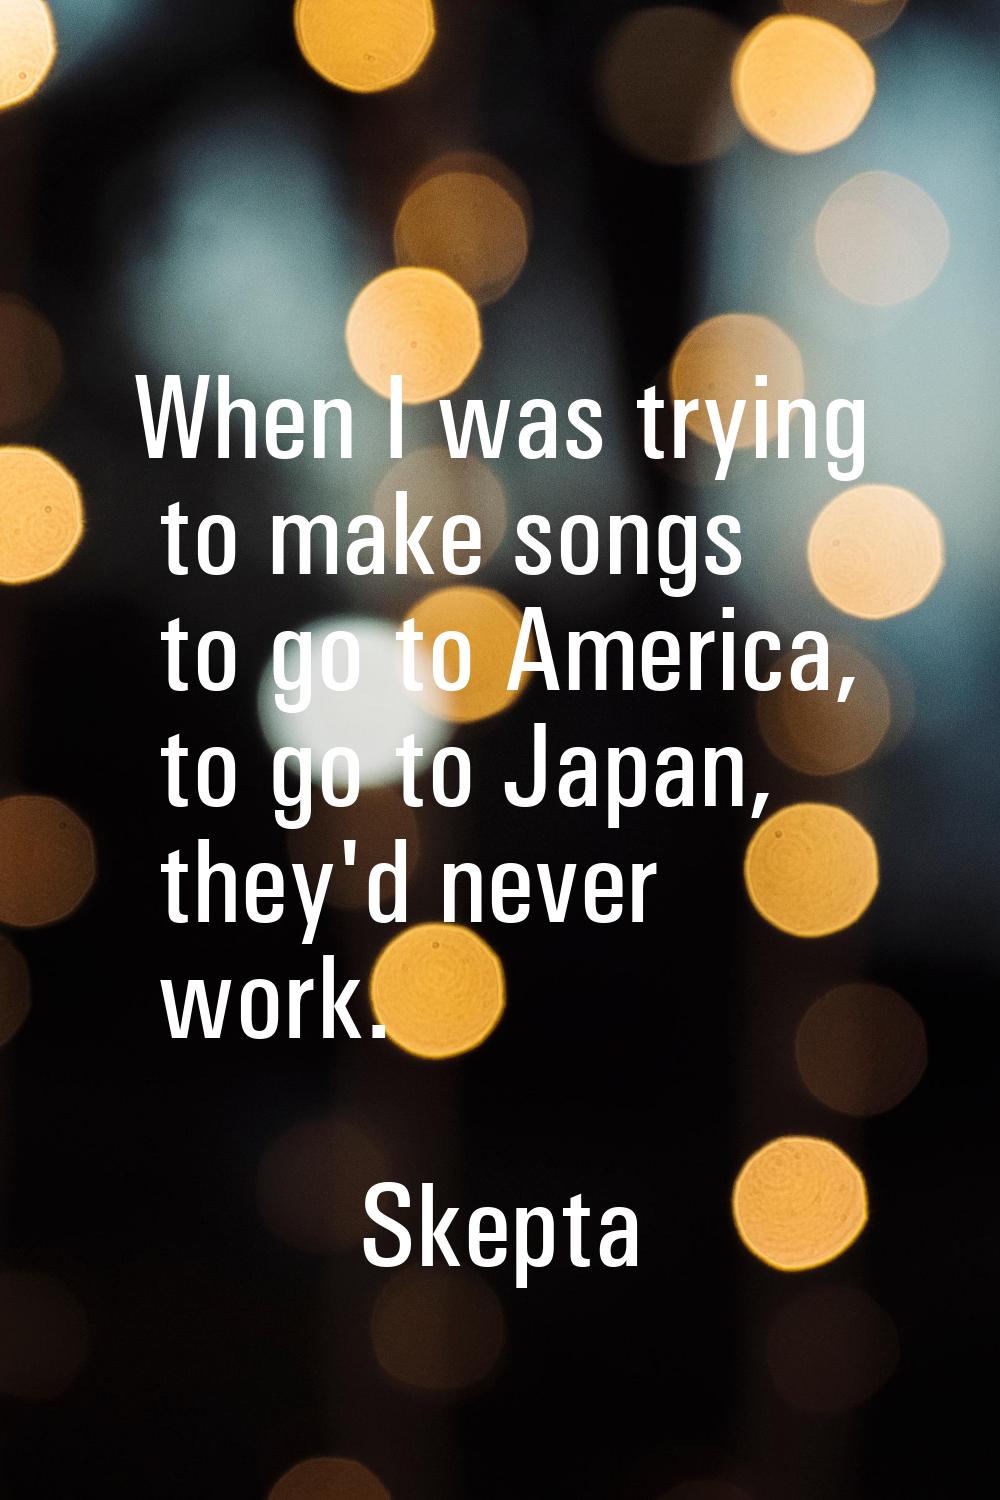 When I was trying to make songs to go to America, to go to Japan, they'd never work.